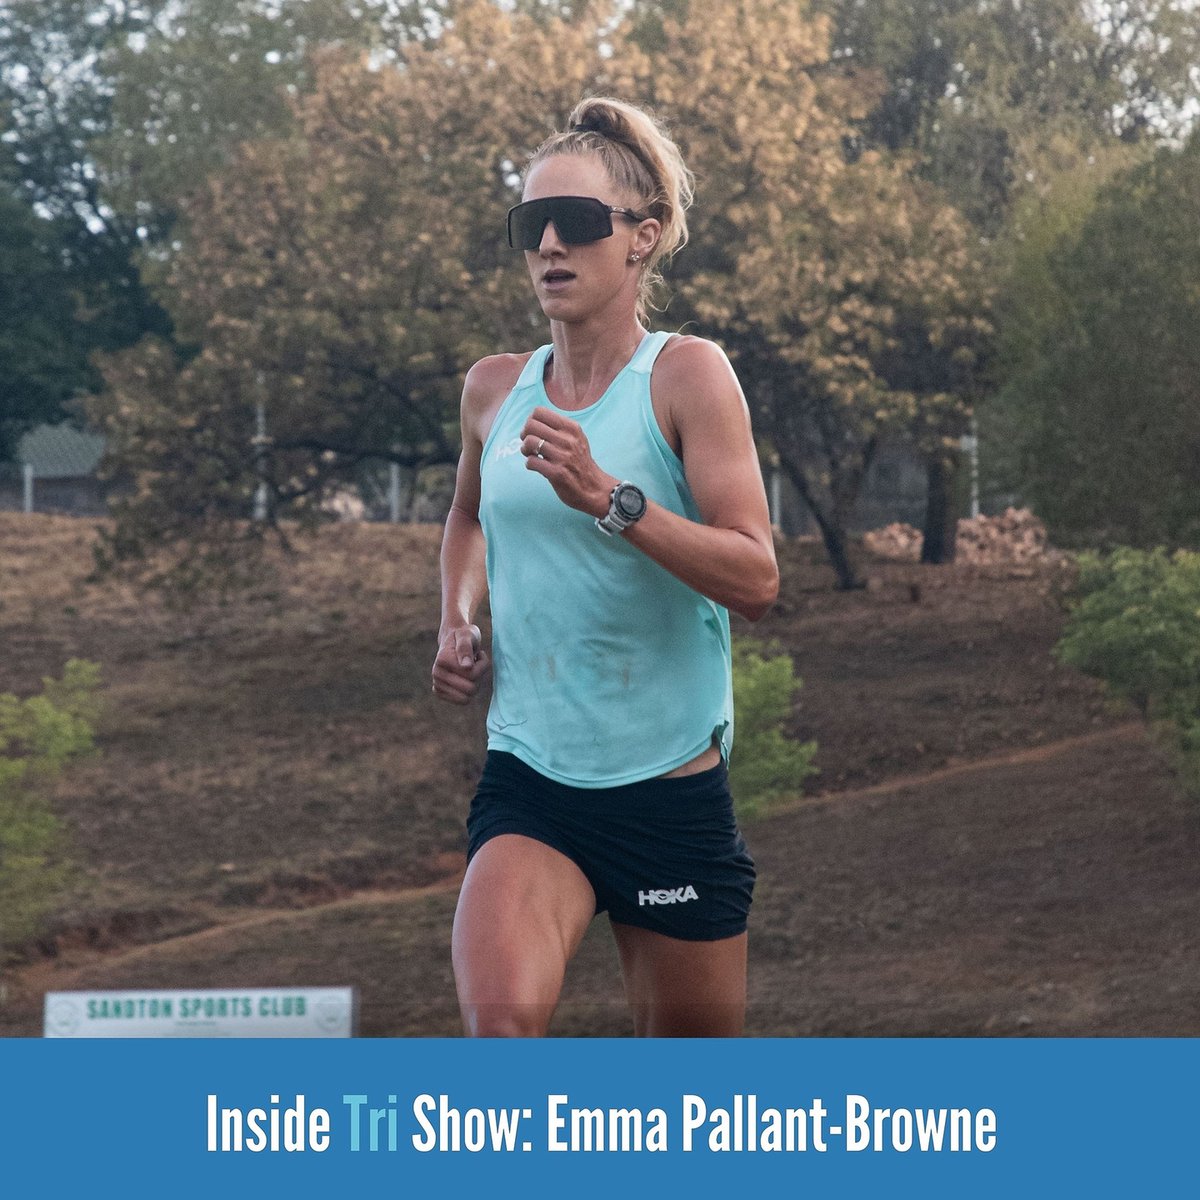 🚨NEW EPISODE!🚨 @EmmaPallant discusses shaking off imposter syndrome to become one of the best triathletes in the world. PLUS Dov Tate from @rideparcours has the lowdown on gravel biking. AND @thewoodeno fills us in on the Highland Ultra 🎧 insidetrishow.com/episode/emma-p…